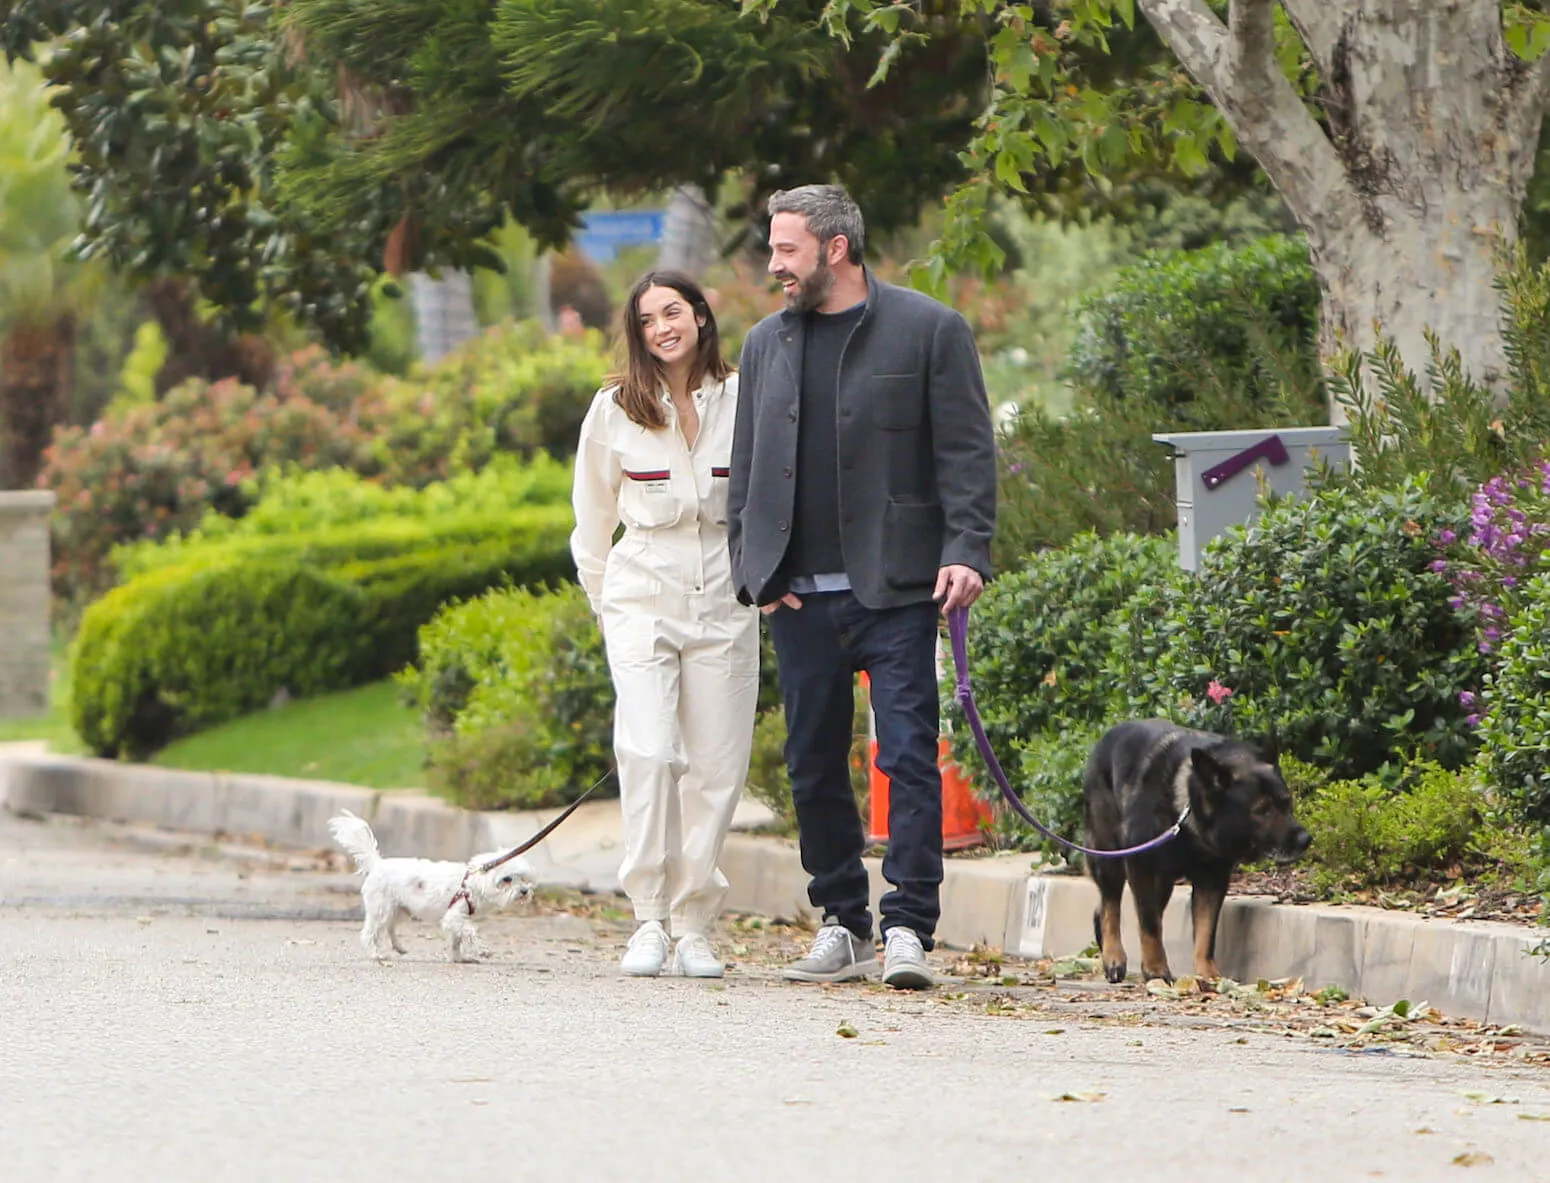 Ana de Armas and Ben Affleck smiling while walking their dogs in LA in 2020